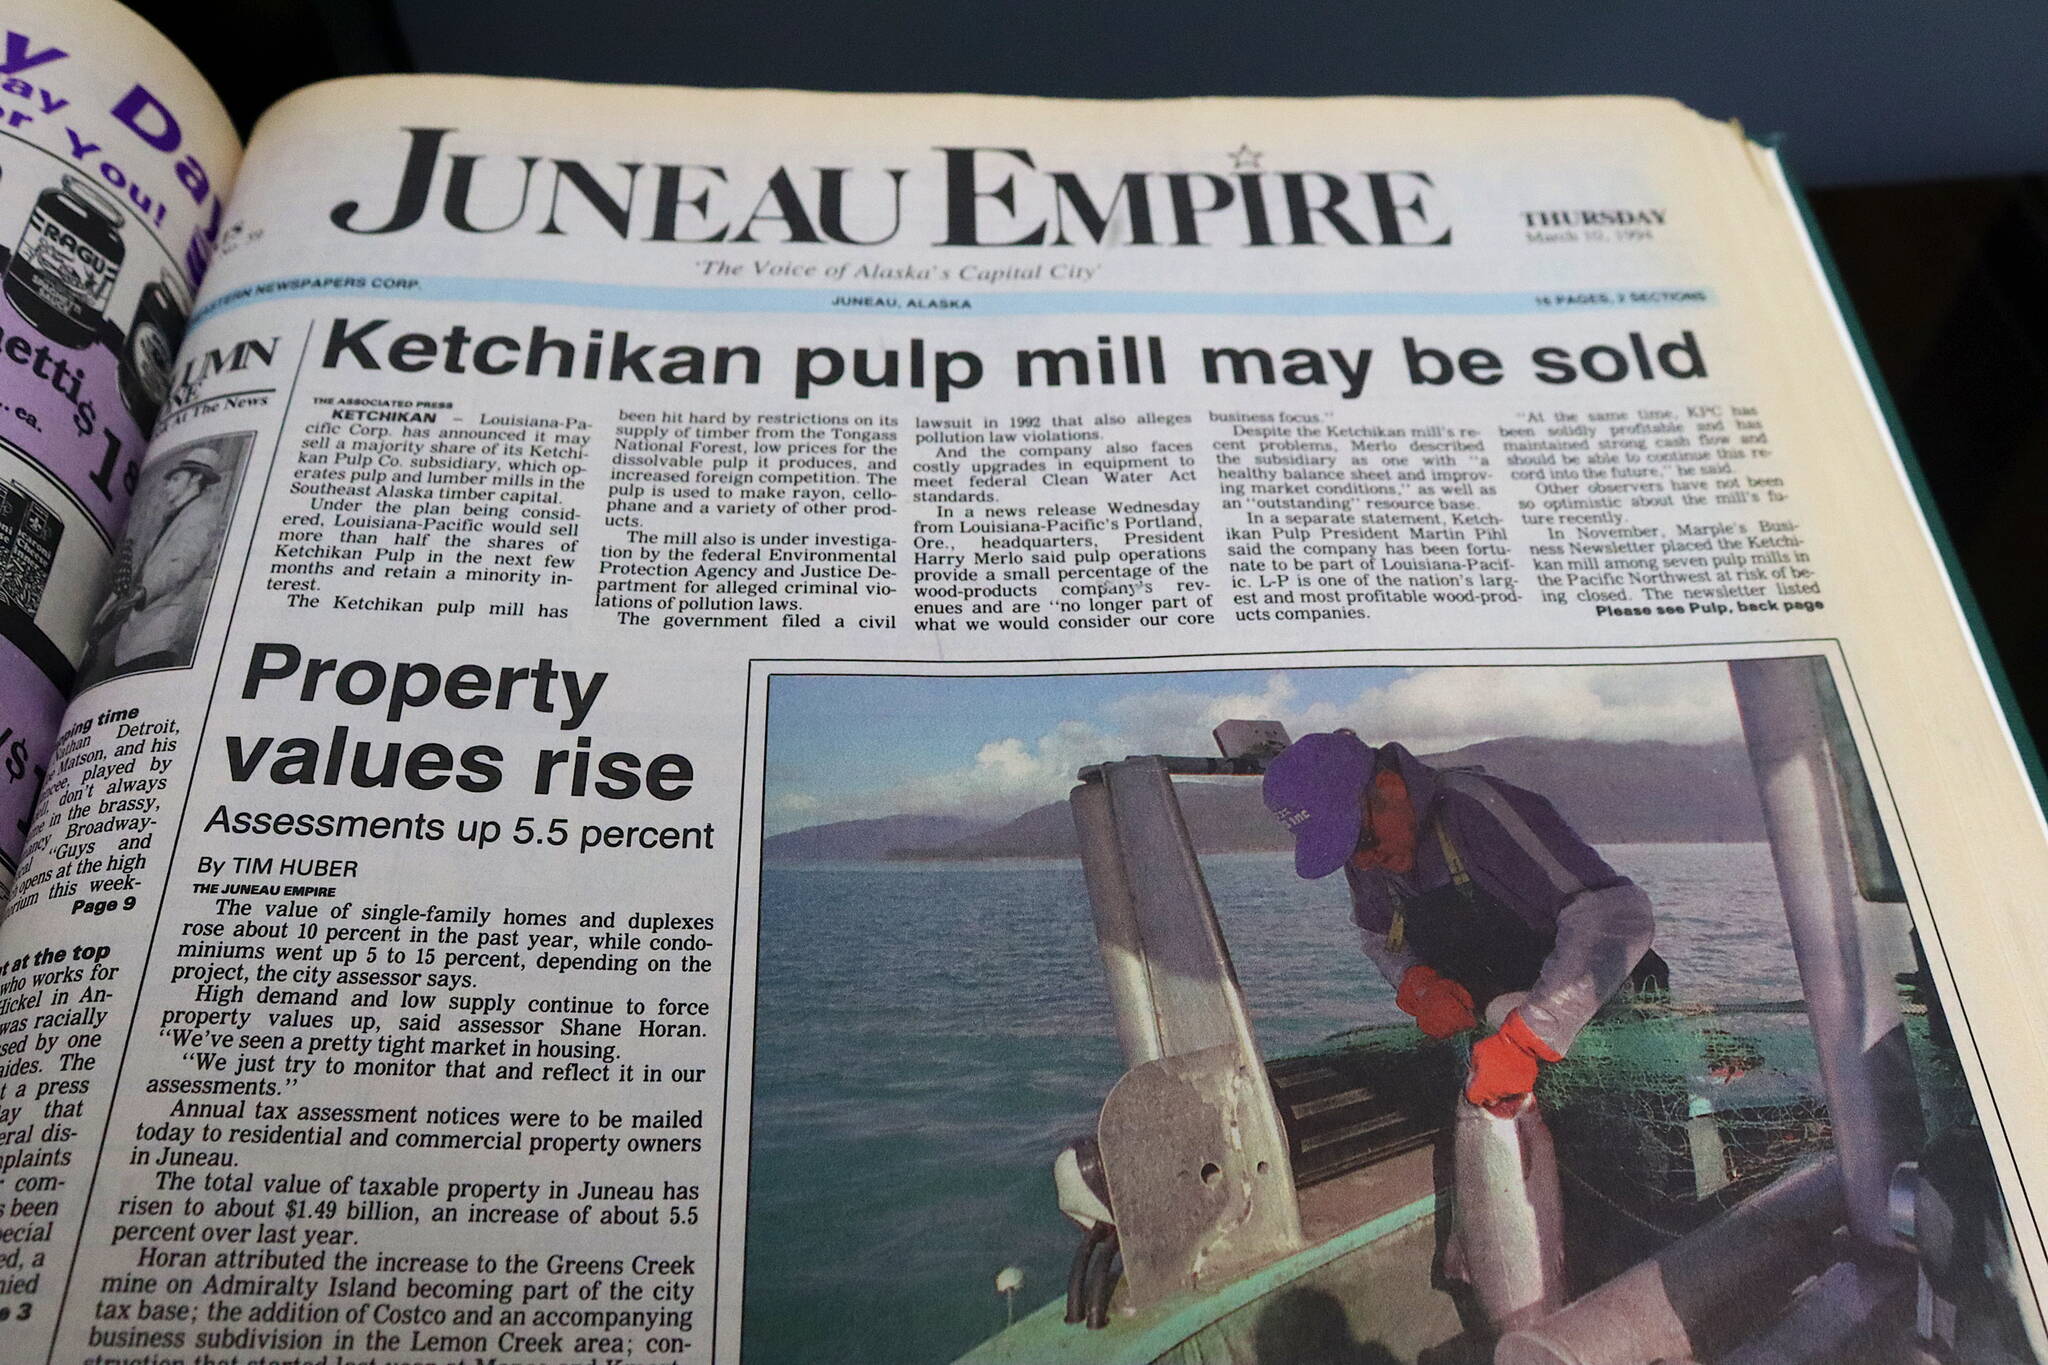 The front page of the Juneau Empire on March 10, 1994. (Mark Sabbatini / Juneau Empire)